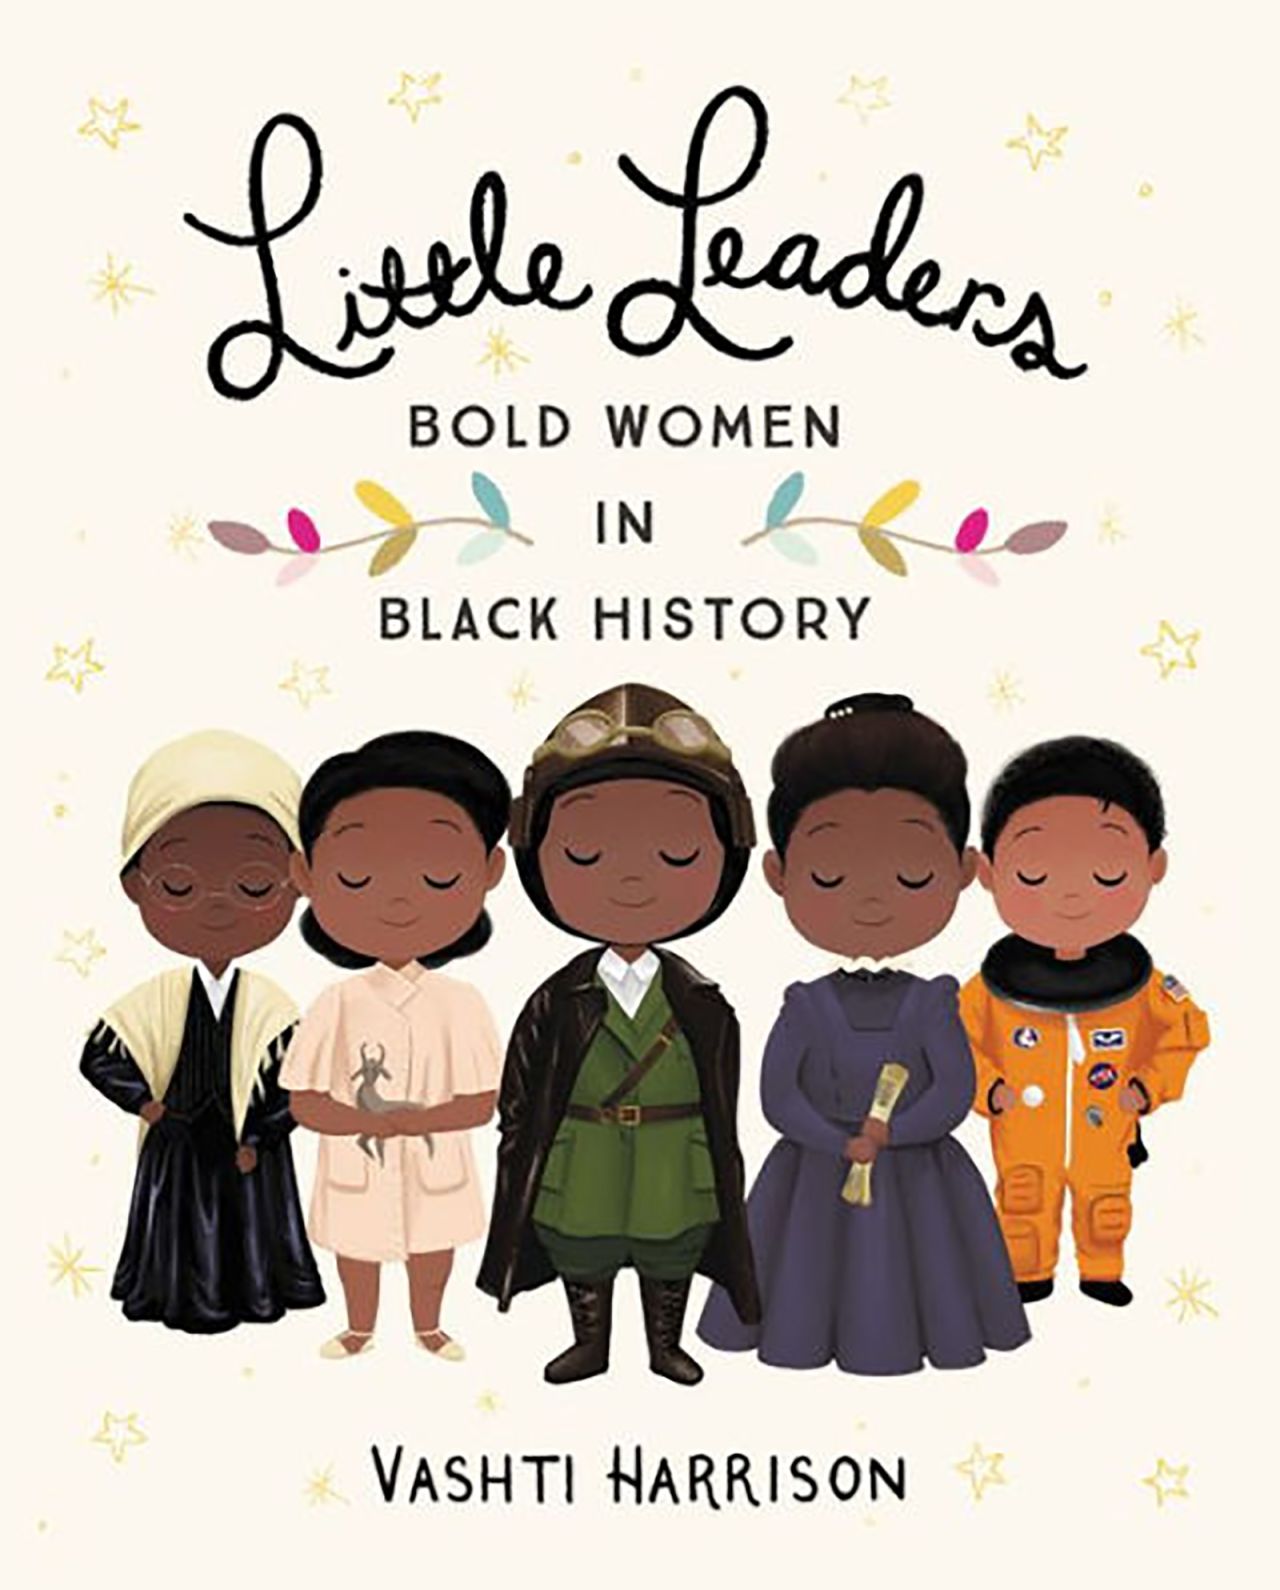 Vashti Harrison introduces her little readers to "Little Leaders: Bold Women in History," black women who made history. 